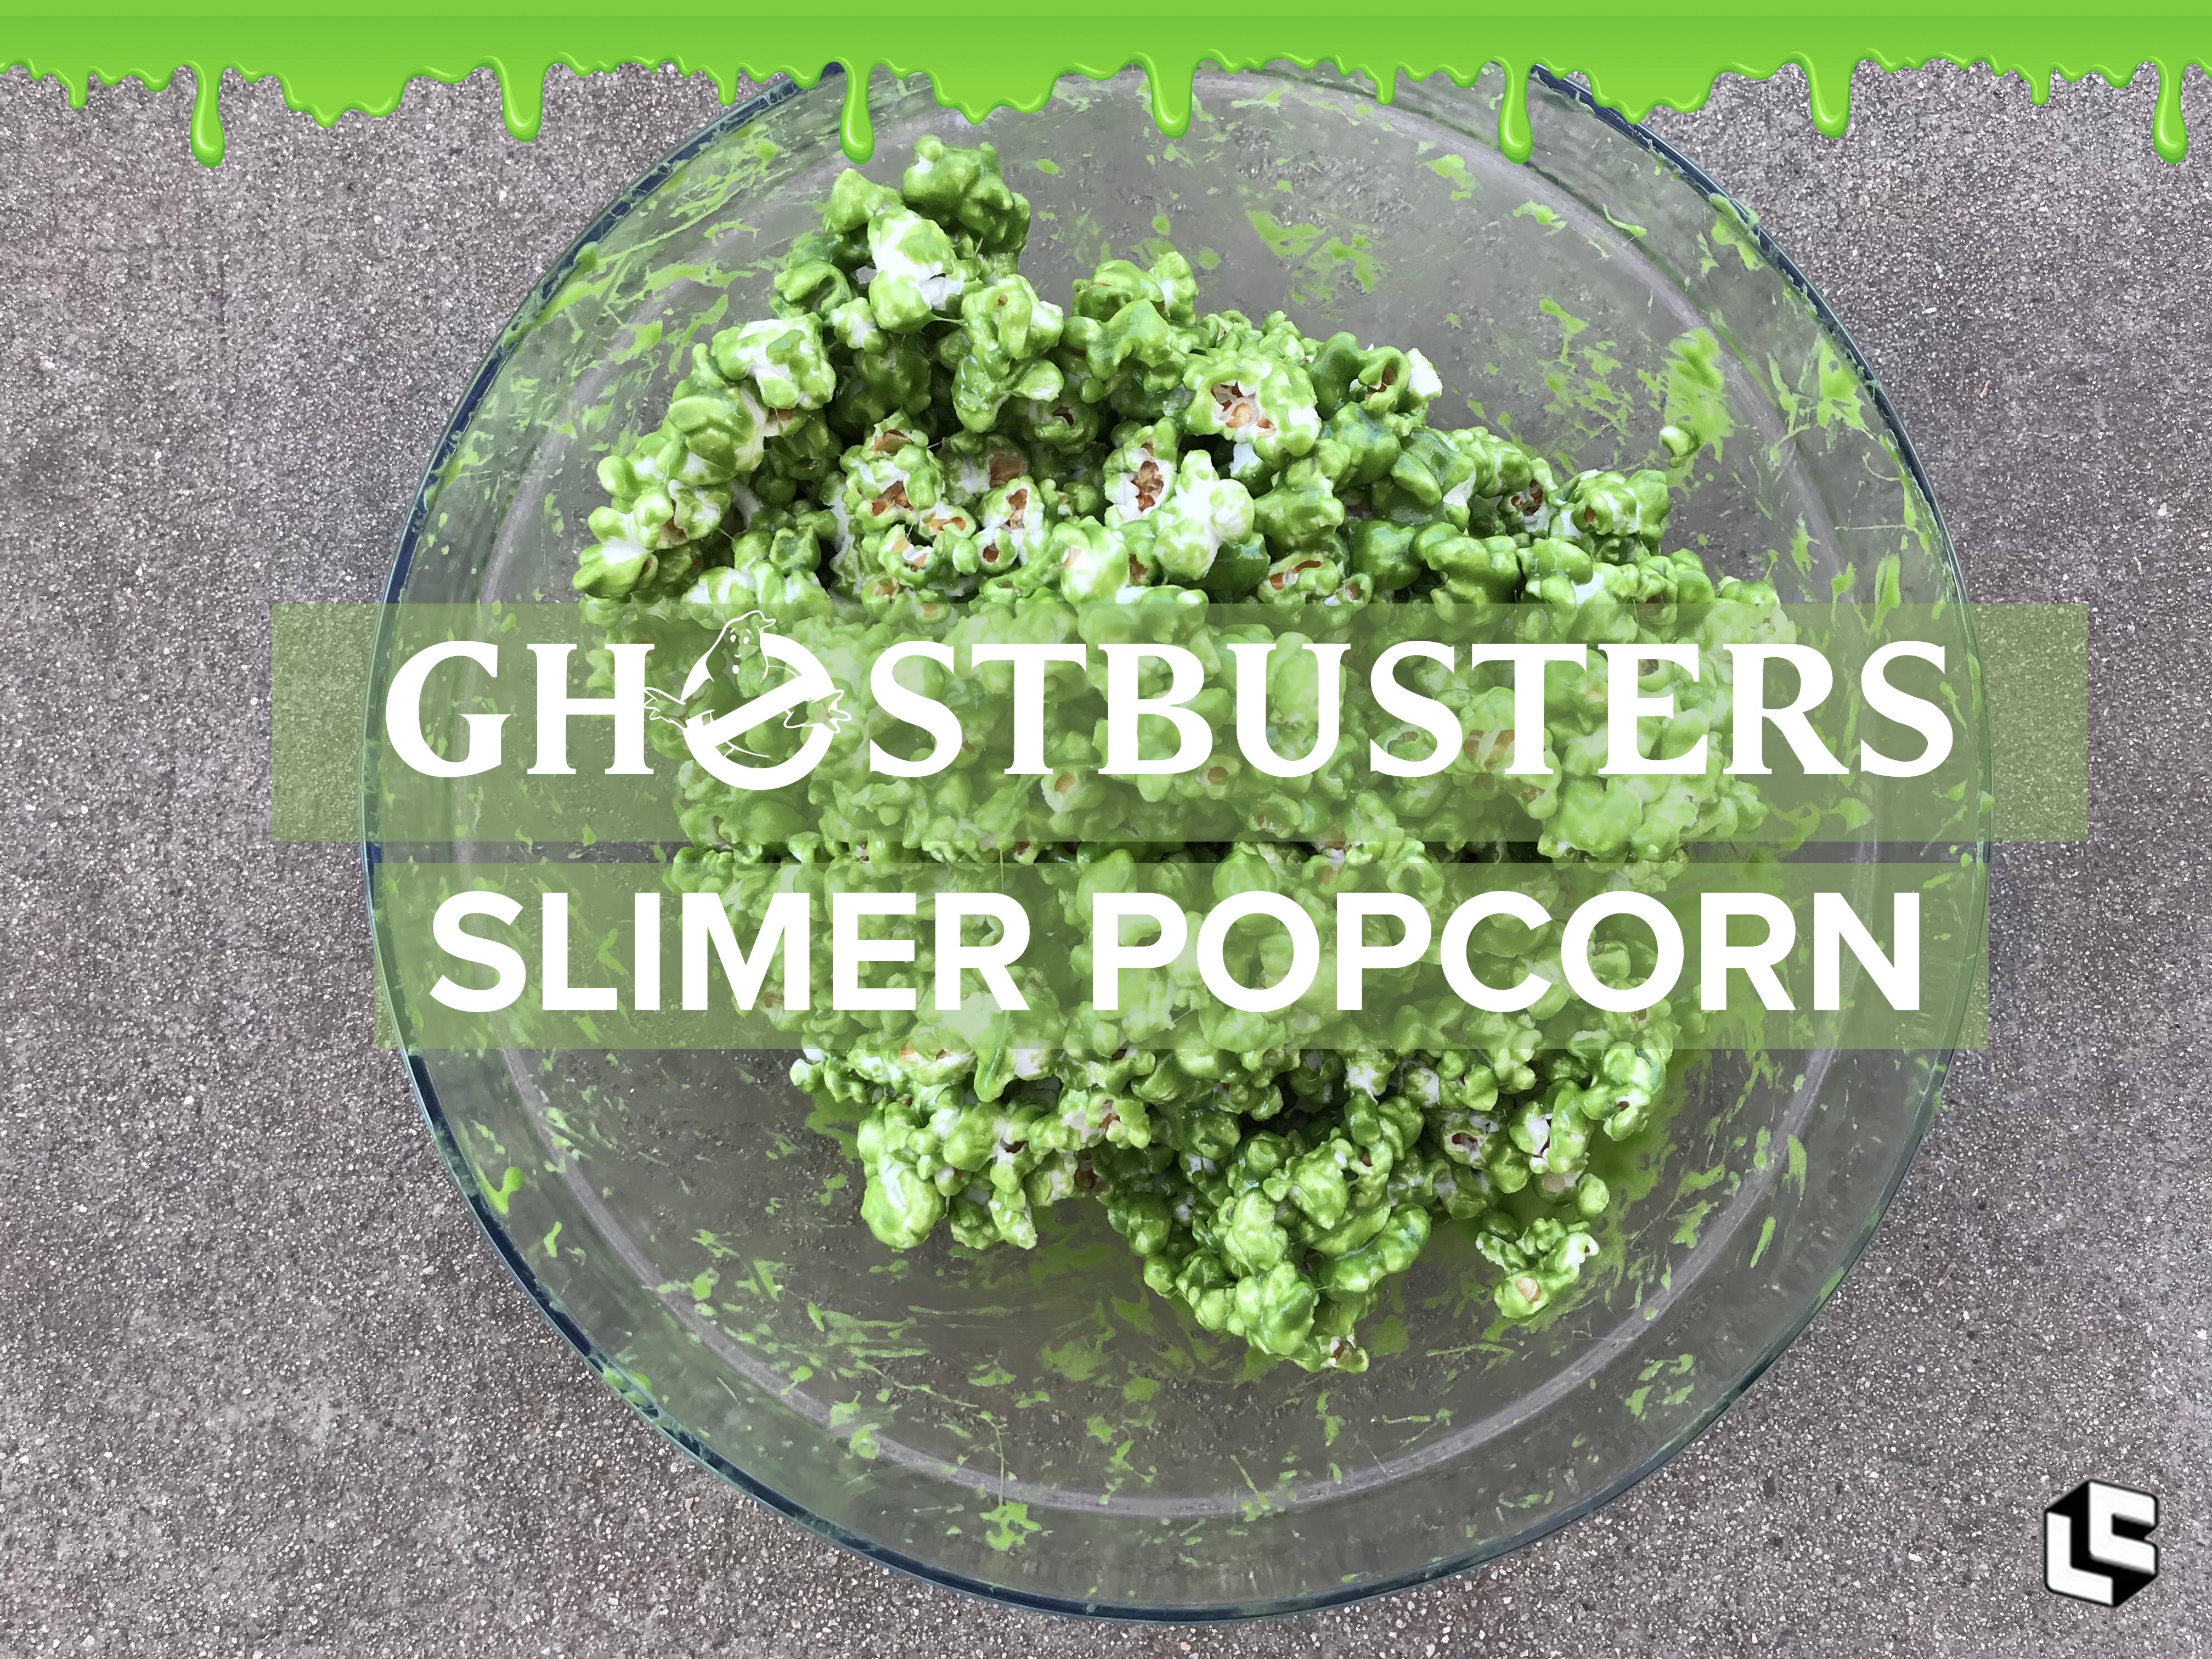 The Daily Crate | Looter Recipe: Ghostbusters Slimer Popcorn